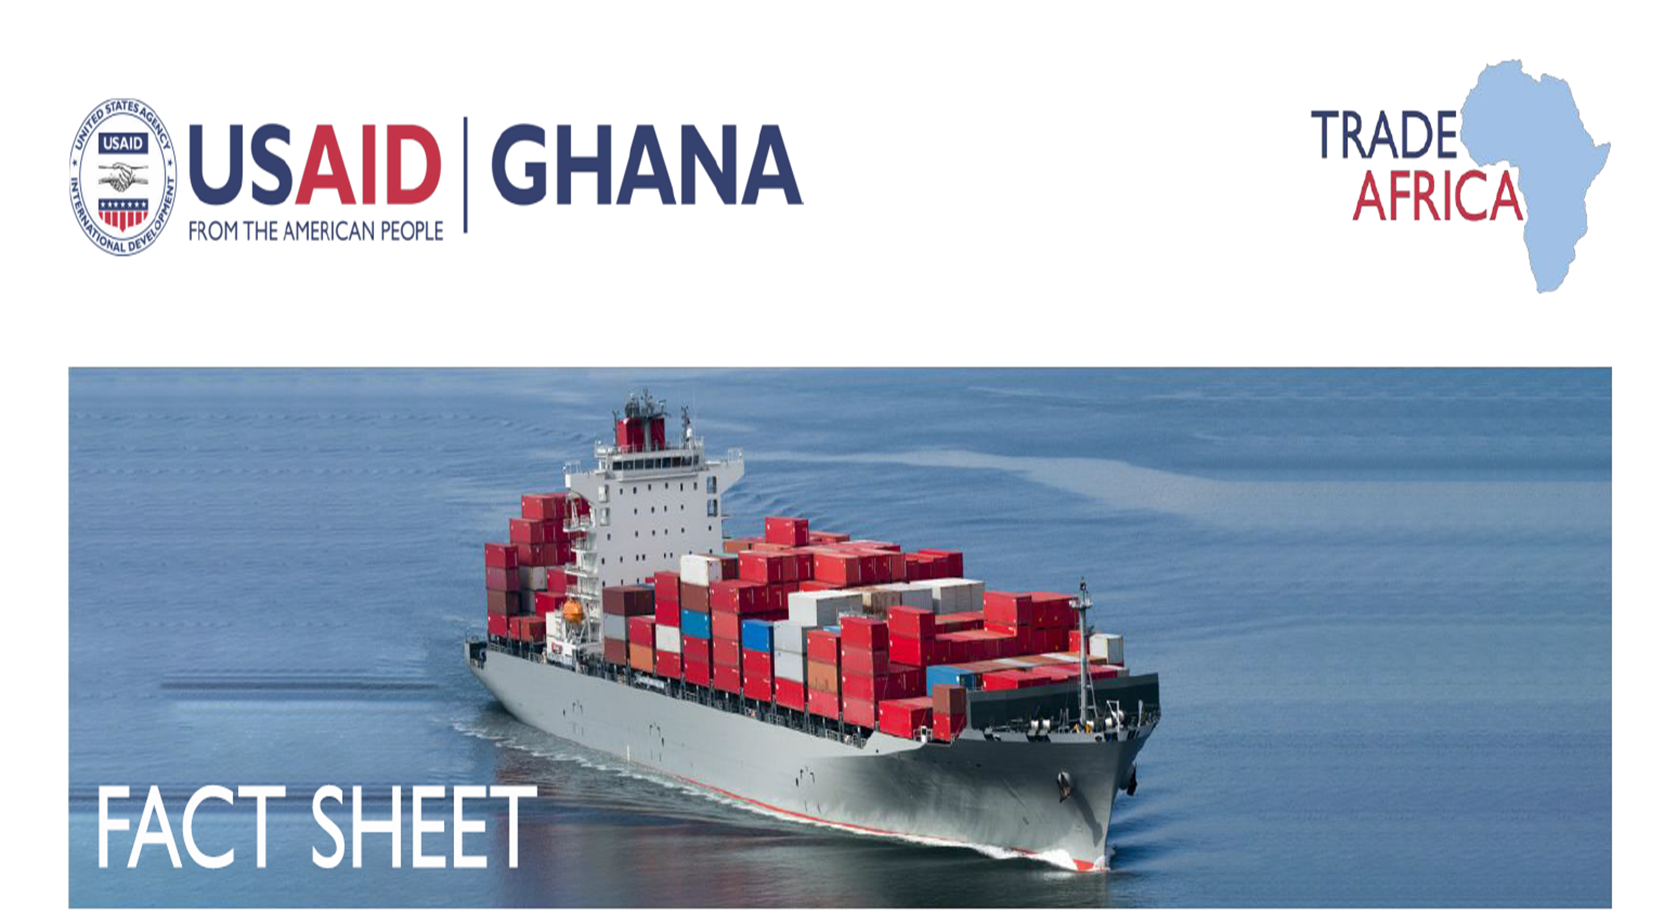 Trade Africa is an initiative of the United States Government announced in July 2013 to strengthen the U.S. relationship with Af